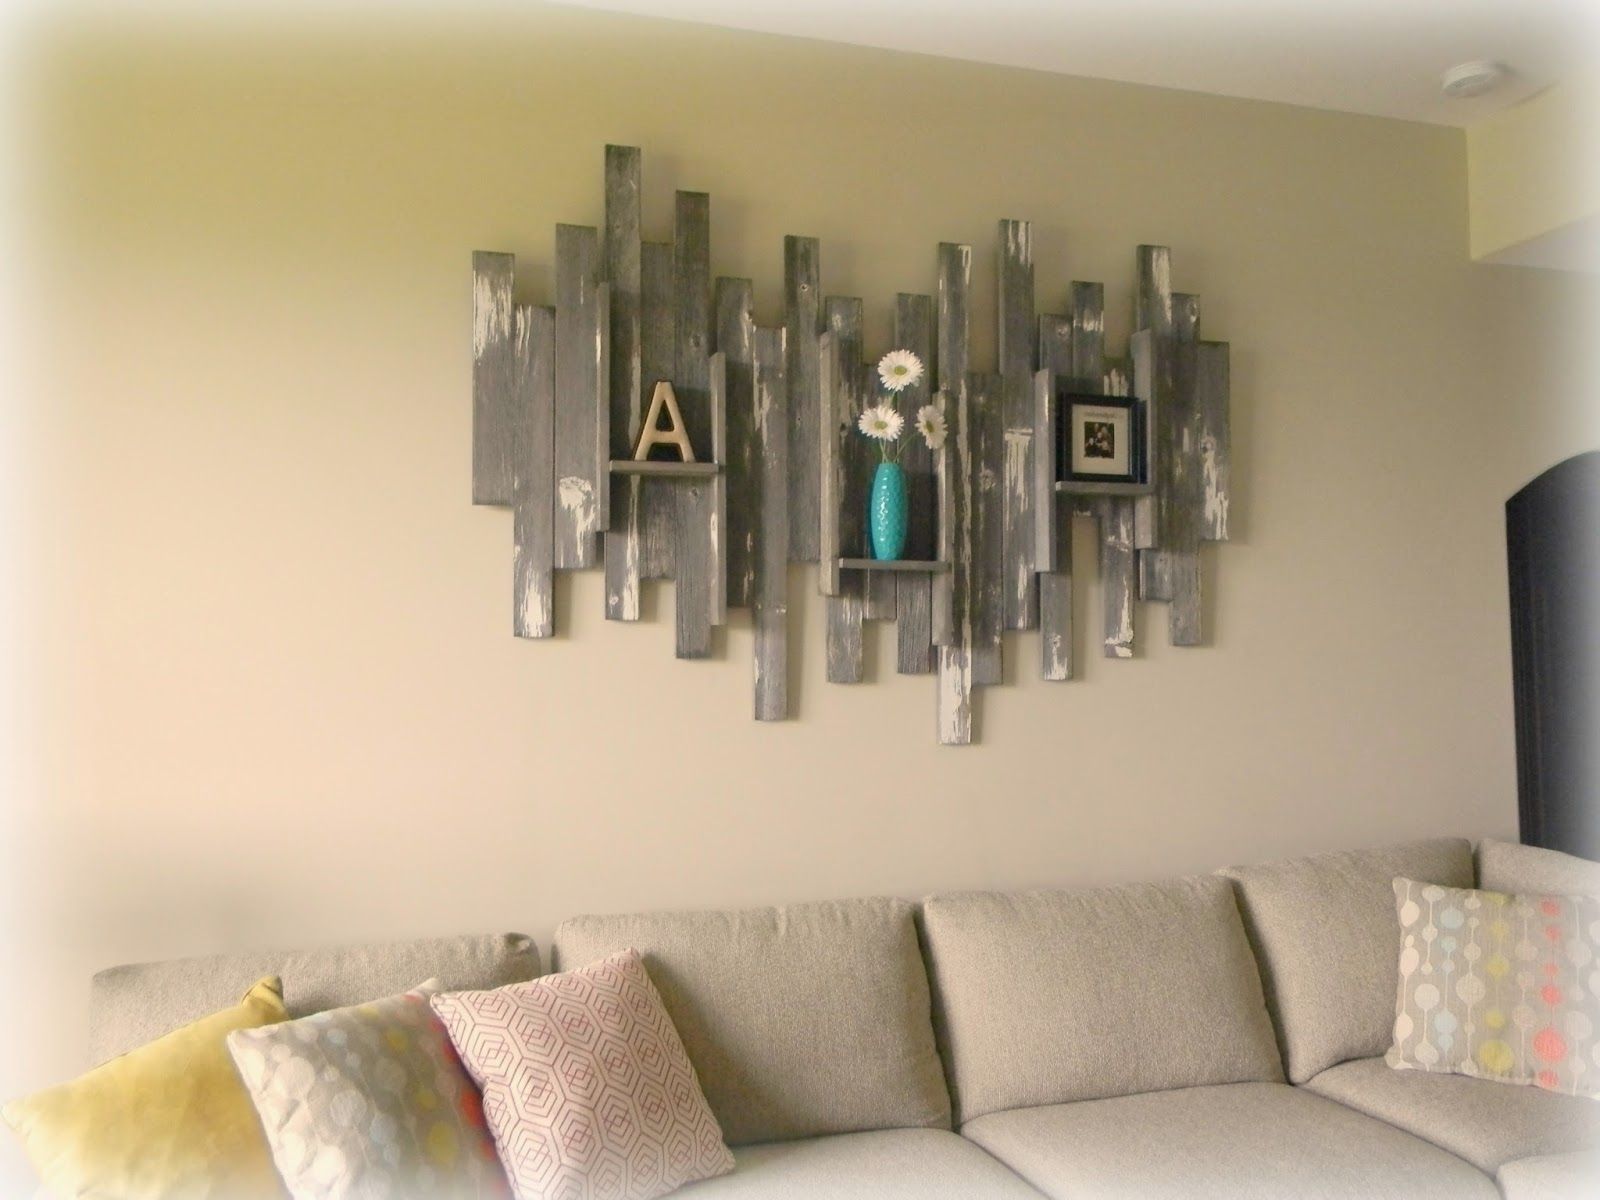 Rustic Fabric Wall Art Pertaining To Favorite Decorations (View 6 of 15)